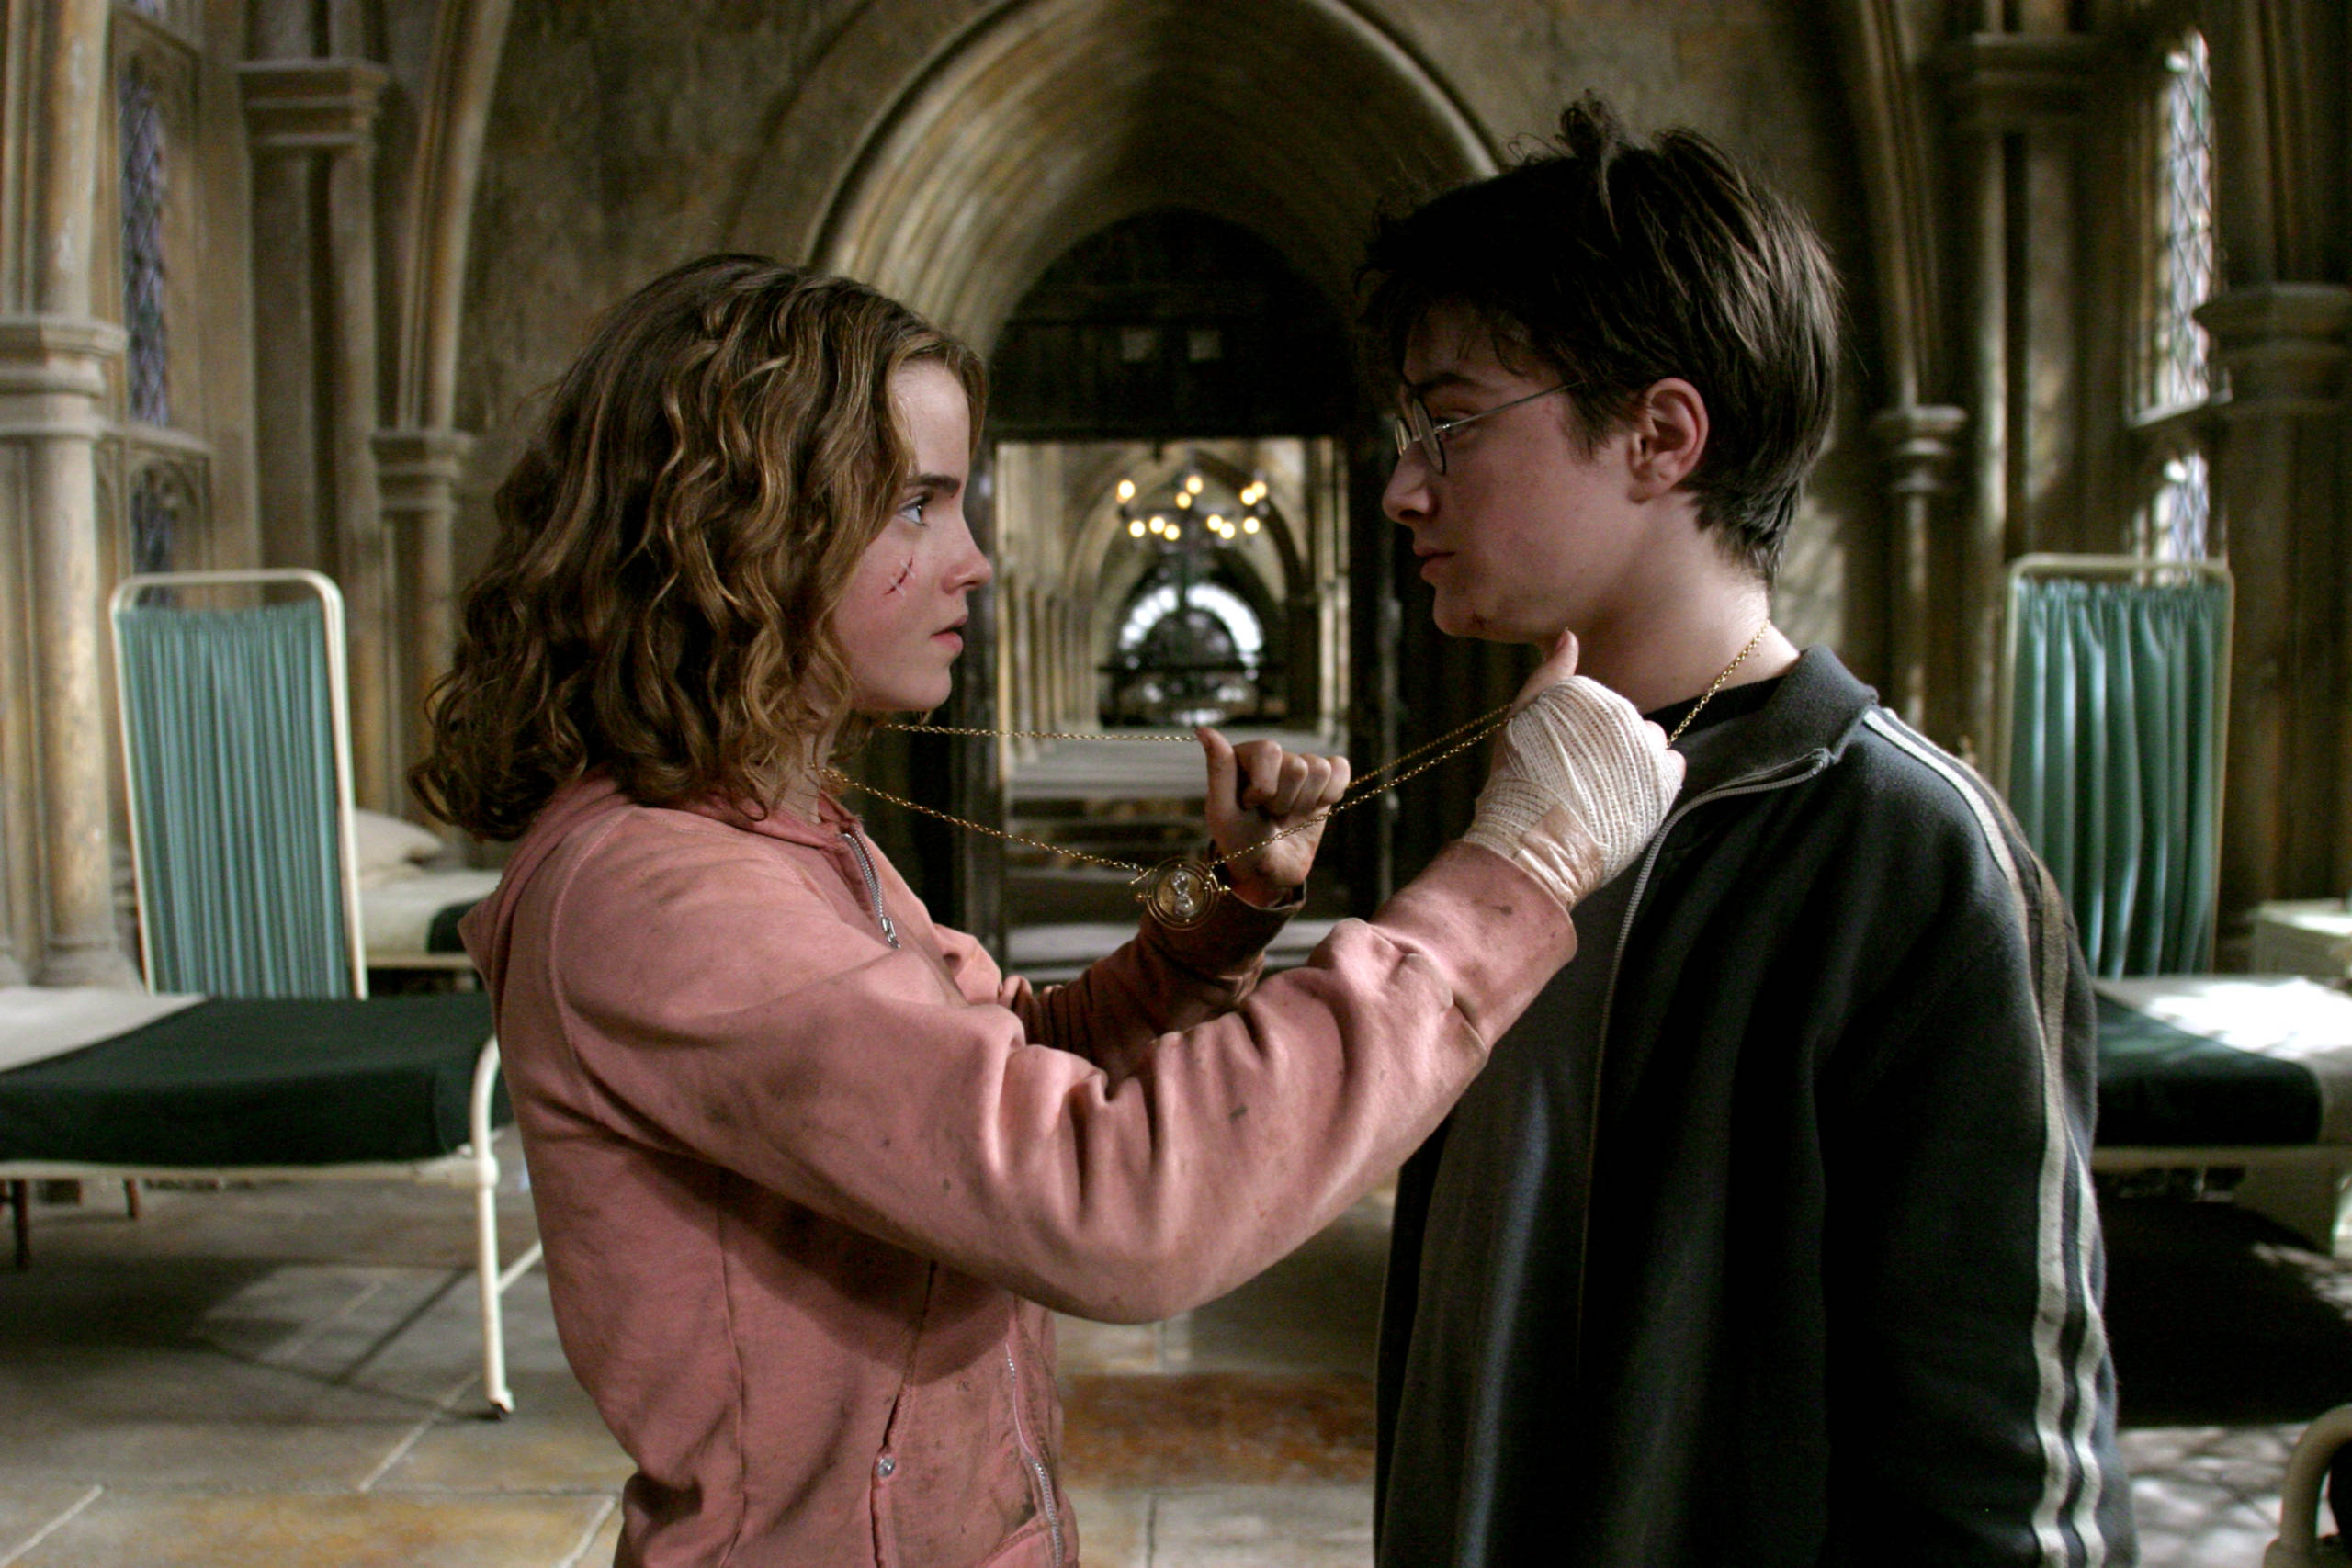 Harry and Hermione using the Time Turner in the Prisoner of Azkaban